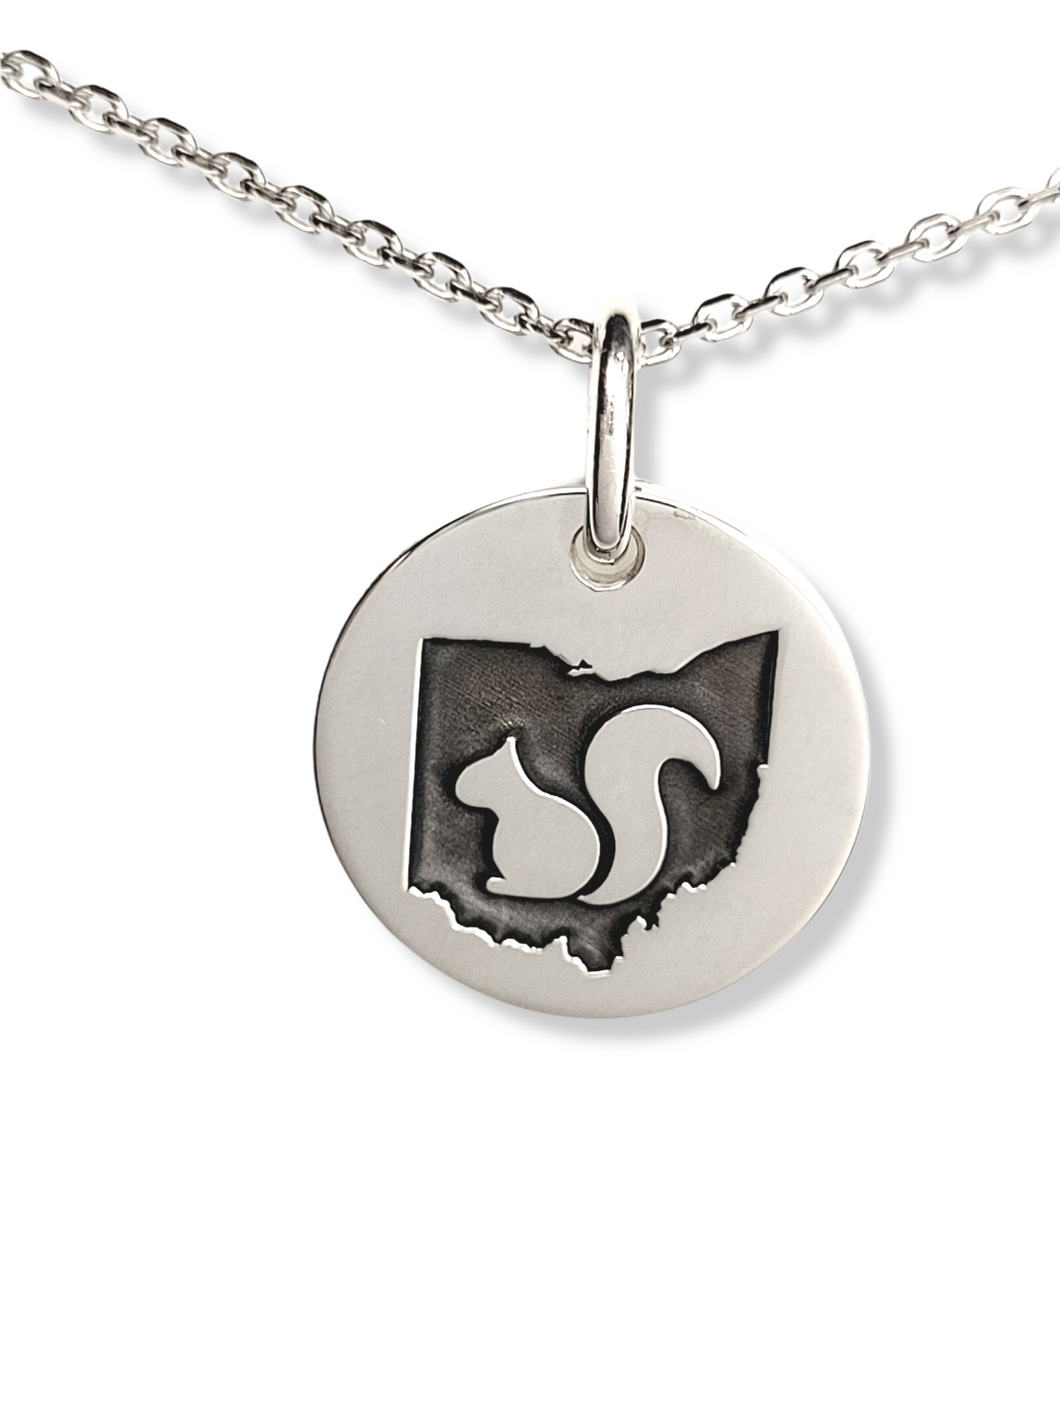 Ohio Squirrel Style Medallion Style Necklace-Small